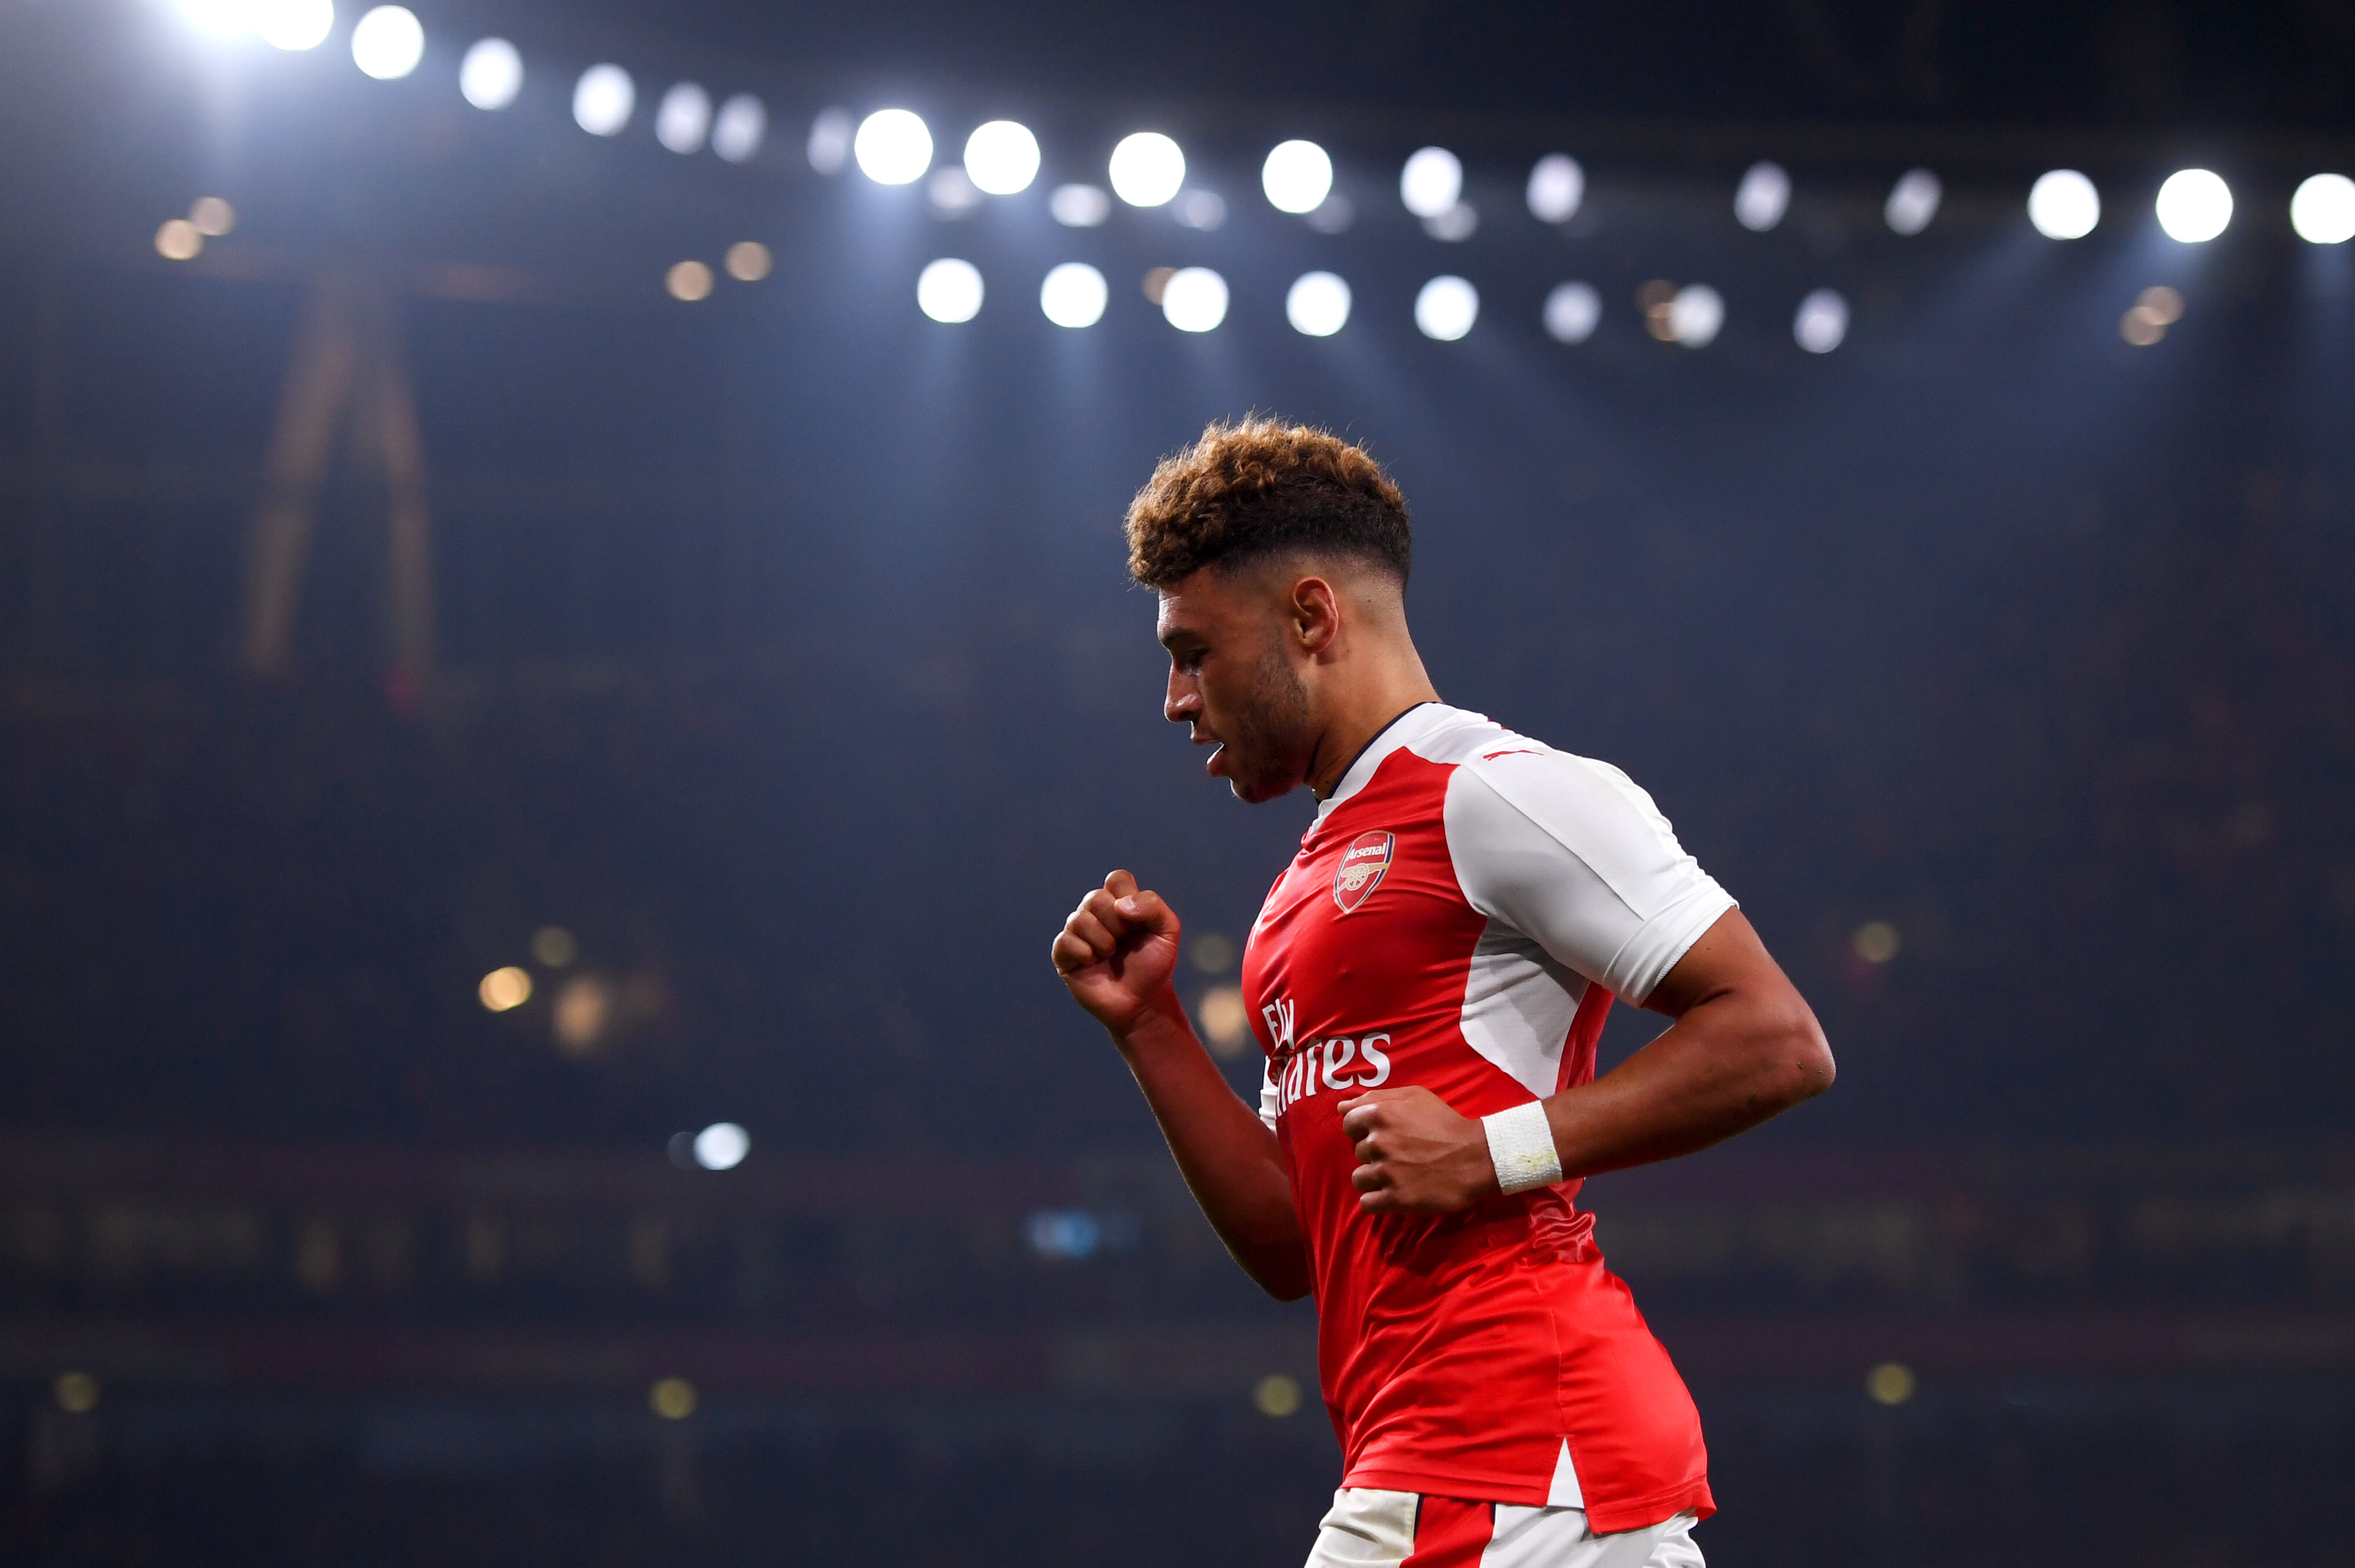 LONDON, ENGLAND - OCTOBER 25:  Alex Oxlade-Chamberlain of Arsenal celebrates scoring his sides first goal during the EFL Cup fourth round match between Arsenal and Reading at Emirates Stadium on October 25, 2016 in London, England.  (Photo by Michael Regan/Getty Images)